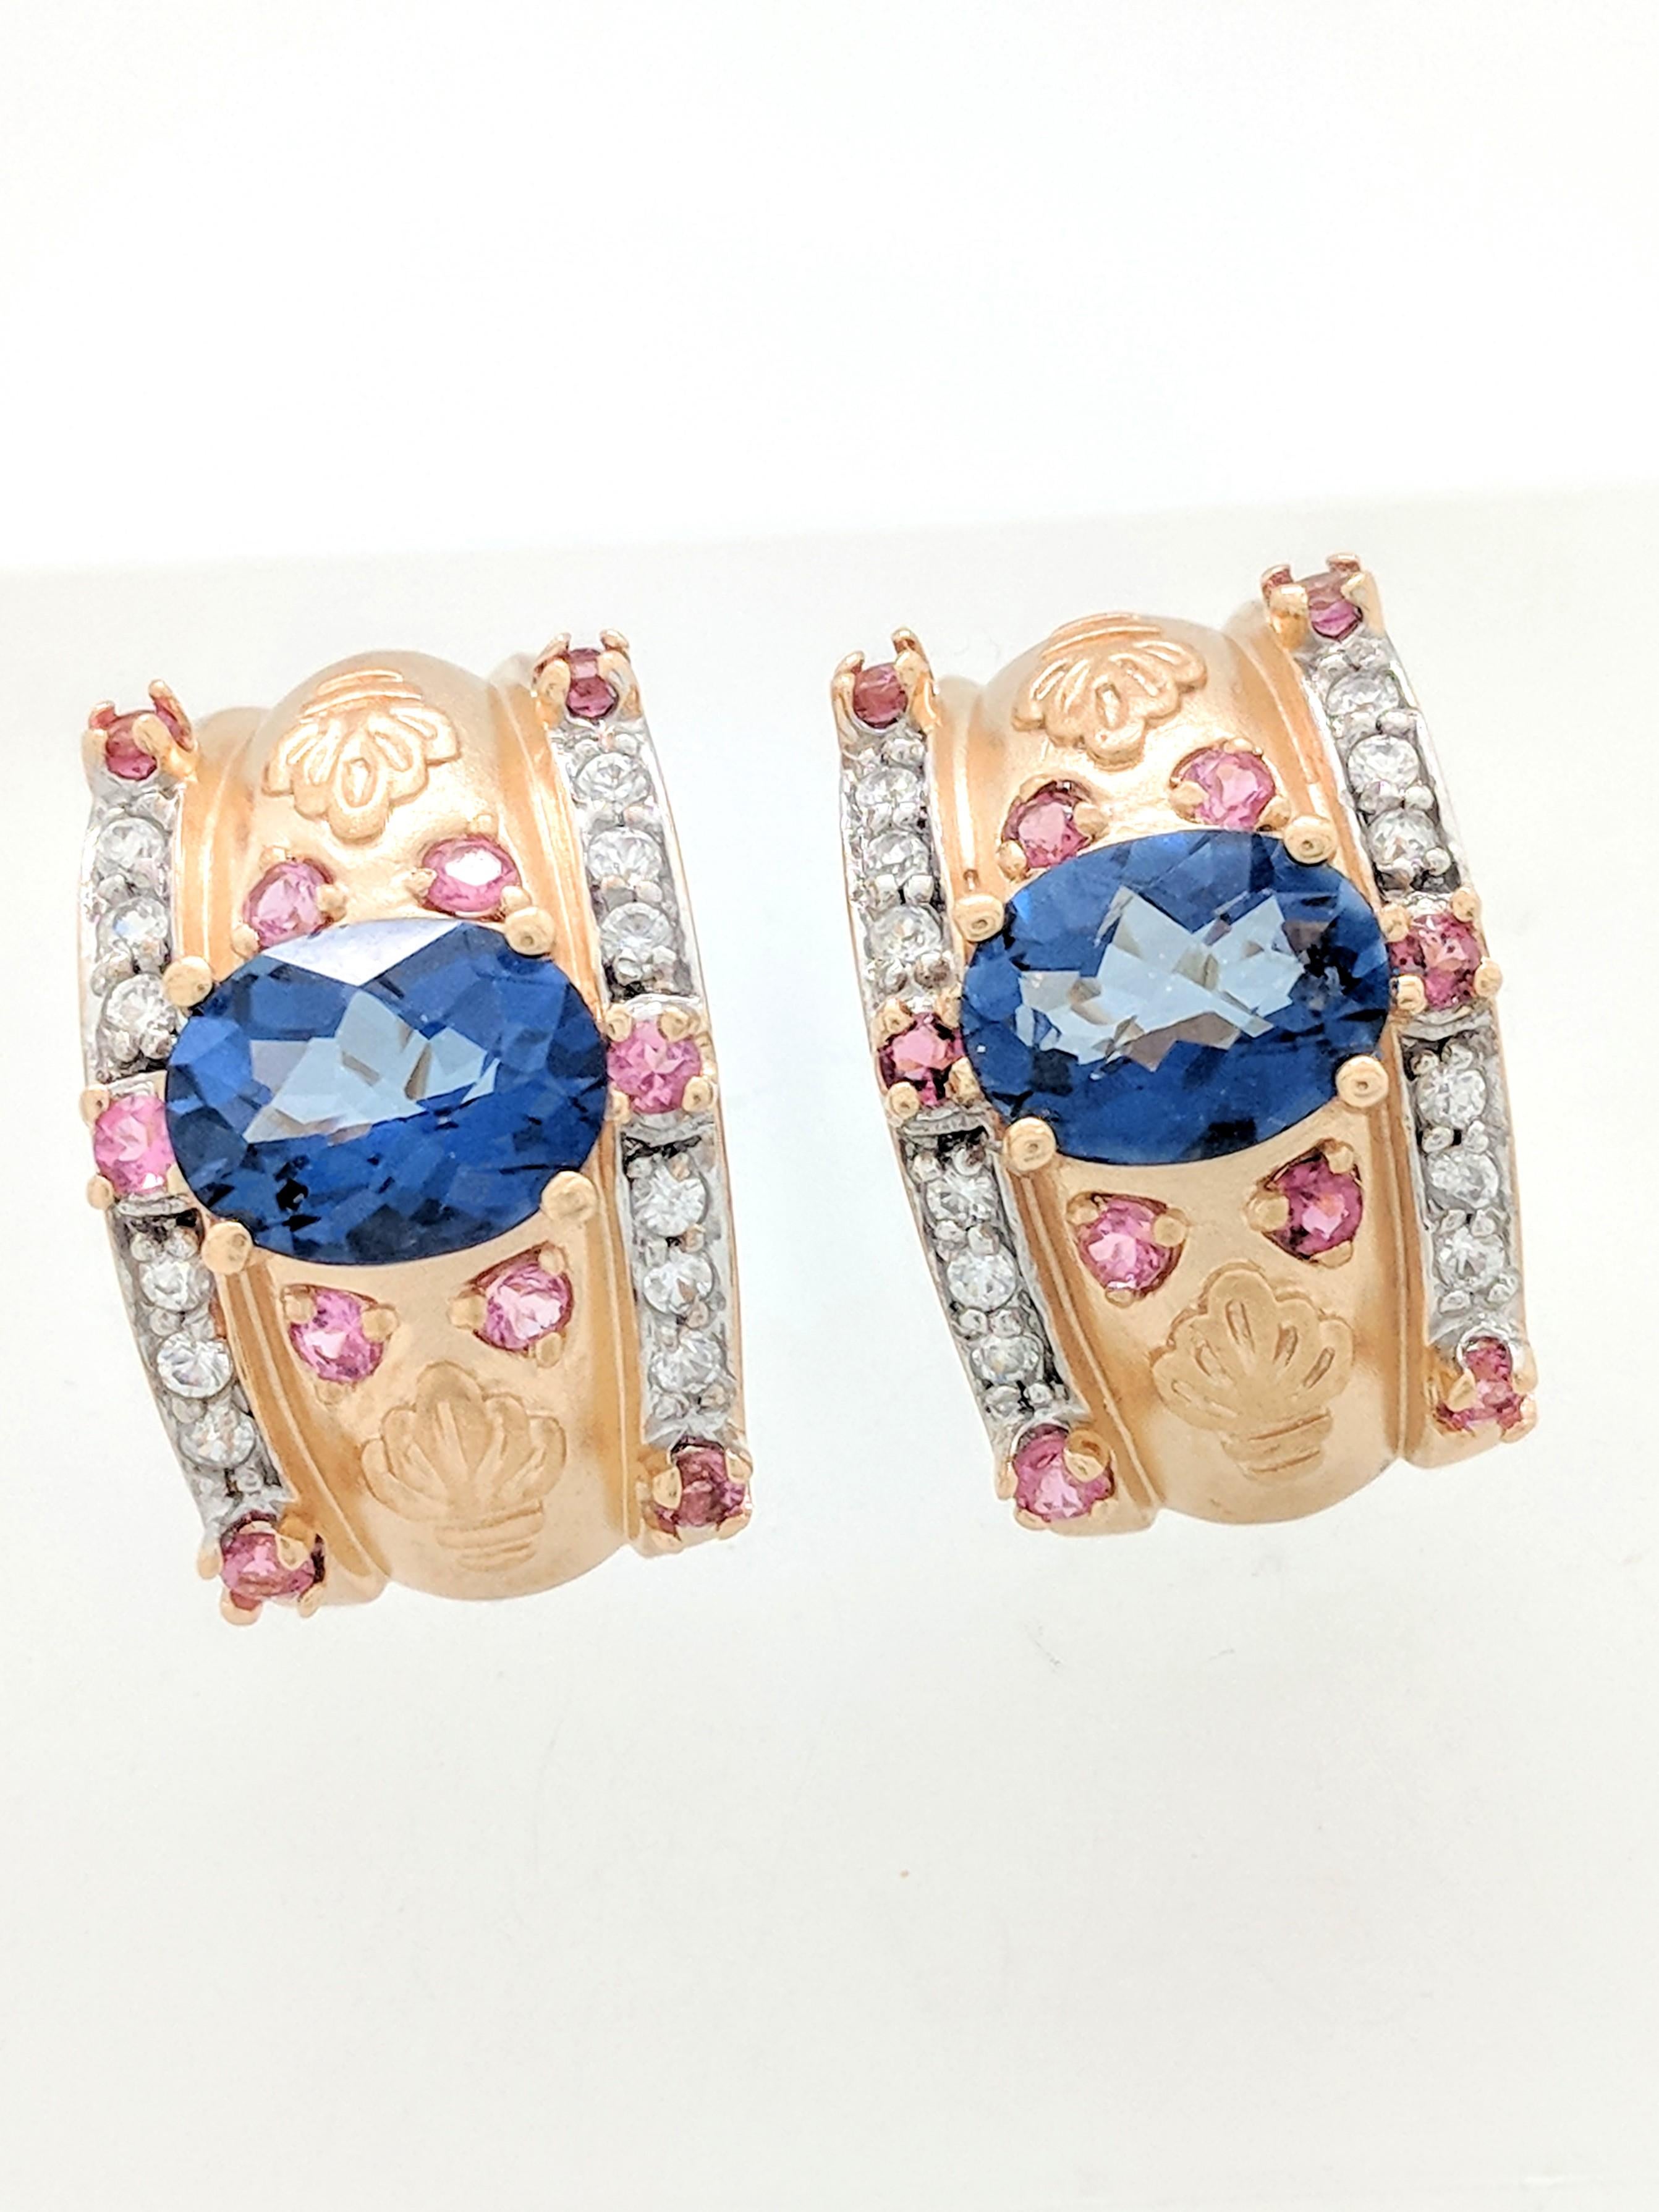 You are viewing a pair of blue sapphire, pink sapphire & diamond earrings. These earrings are crafted from 14k yellow gold and weigh 10.4 grams. Each earring features (1) 9x7mm oval prism cut blue sapphire, (10) 2mm round pink sapphires and (12)